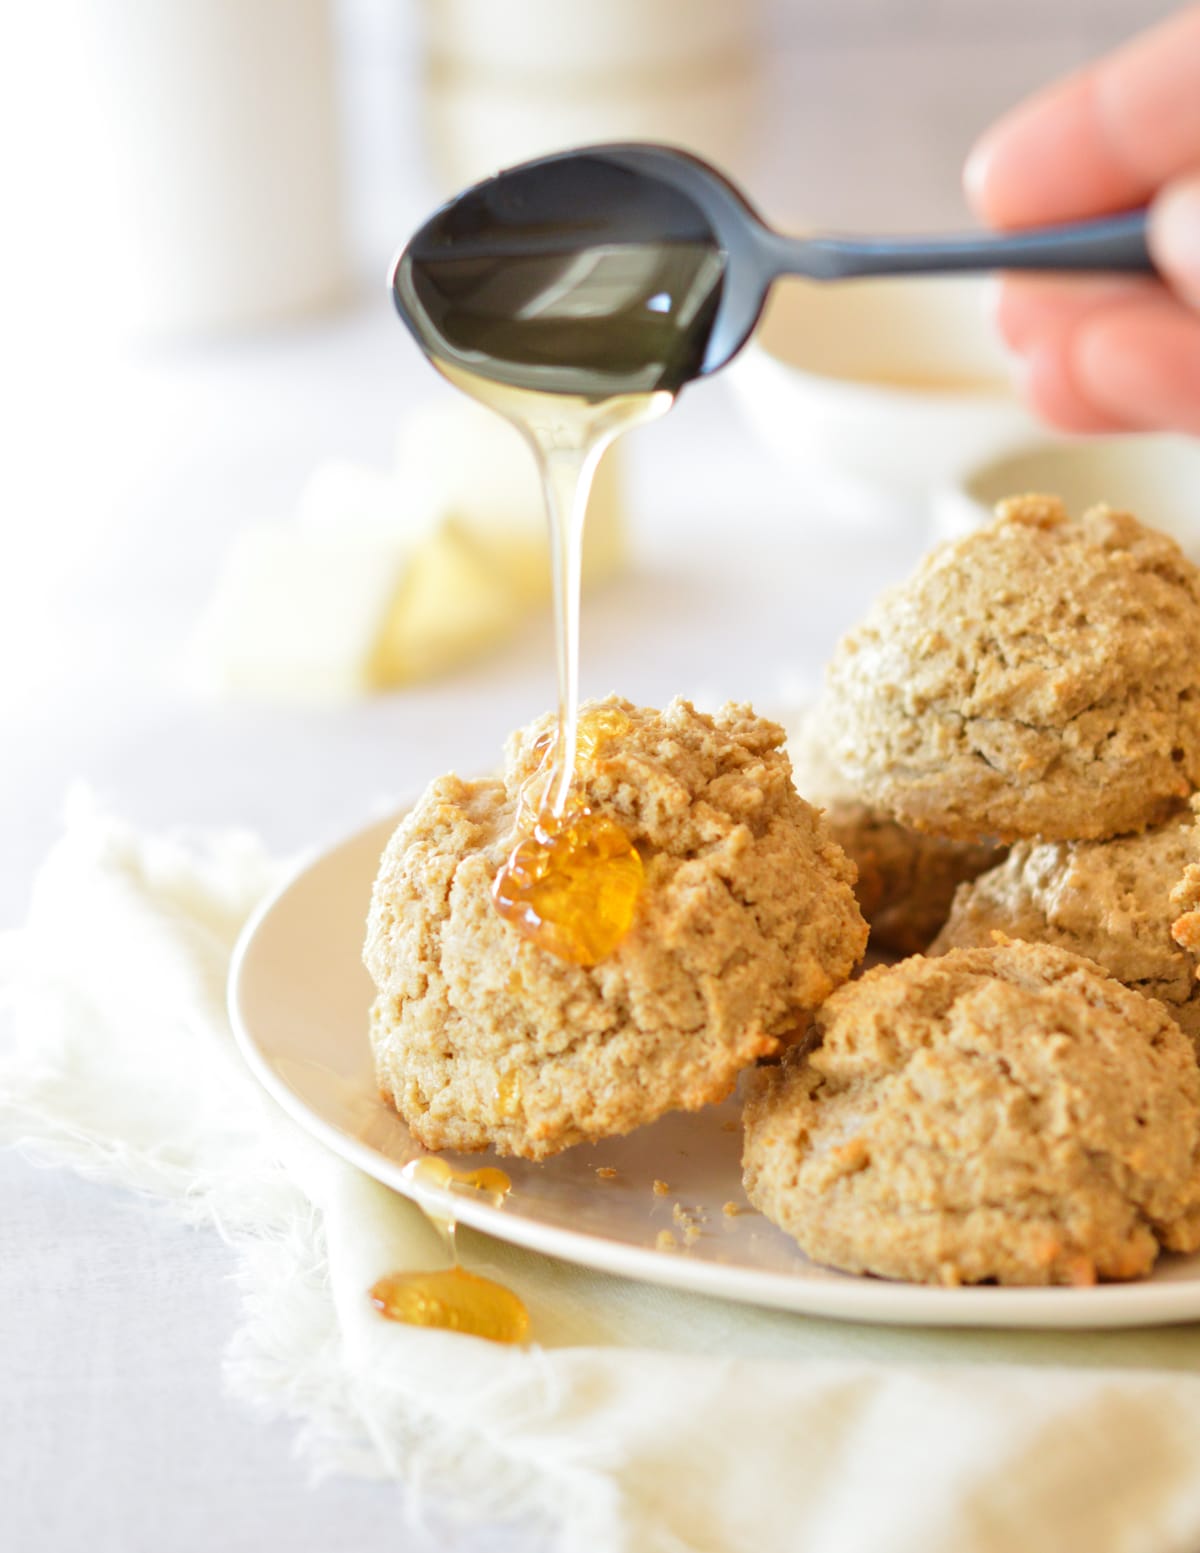 pouring honey onto oat flour biscuits.